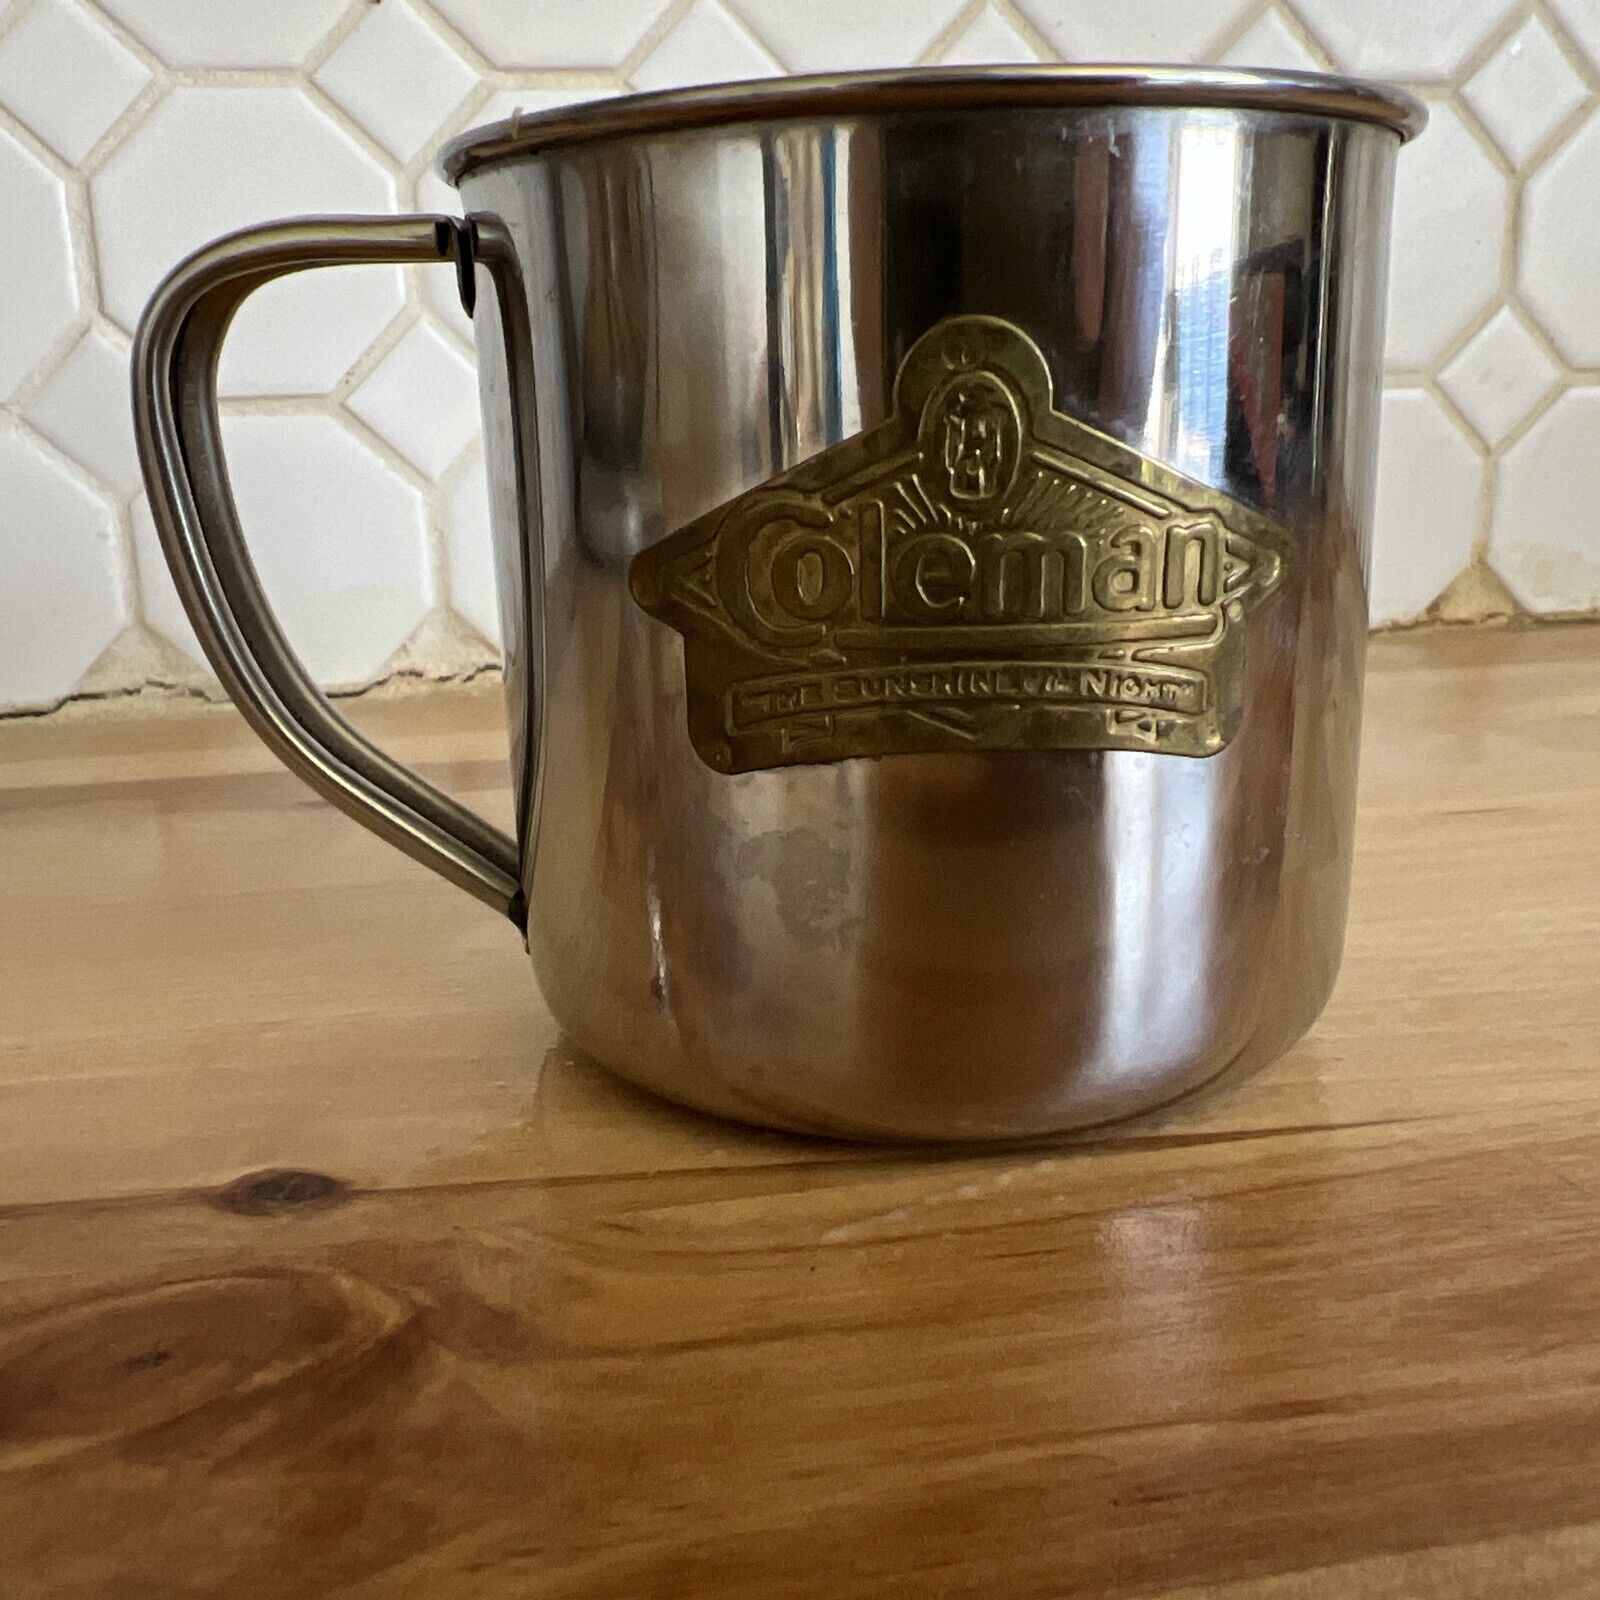 Vintage Coleman The Sunshine of the Night Stainless Cup Metal Camping Mug 3